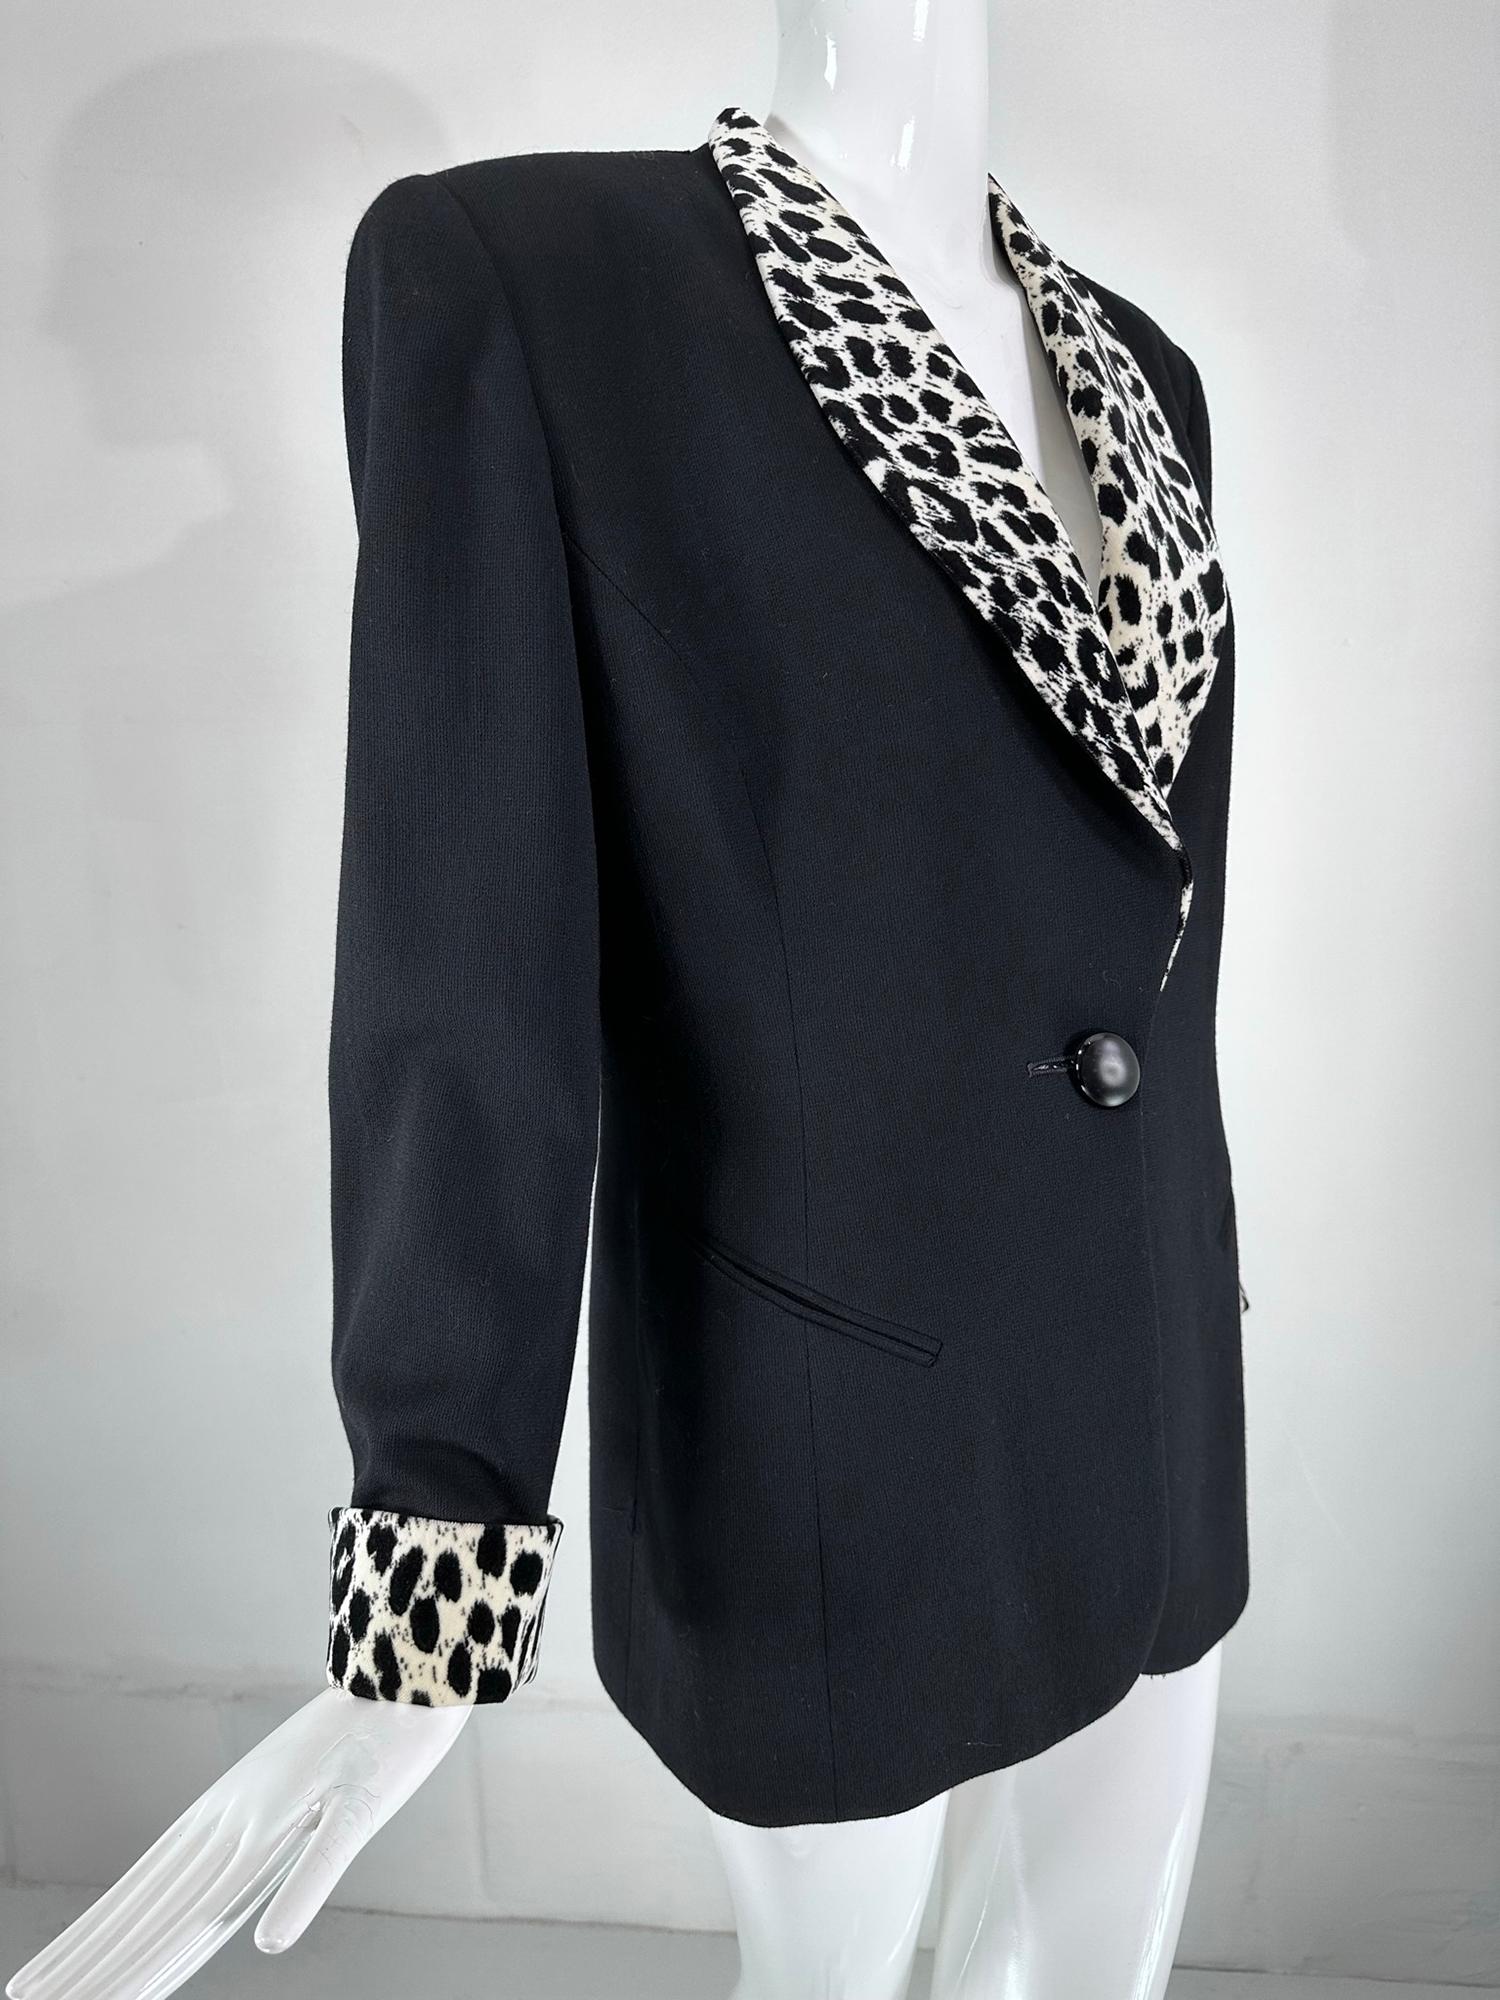 Christian Dior princess seam tuxedo style jacket with leopard velvet collar, facings  & cuffs. Black wool crepe jacket, fitted, elongated hip length silhouette, angled besom front pockets. Single breasted jacket with shawl collar & matching turn